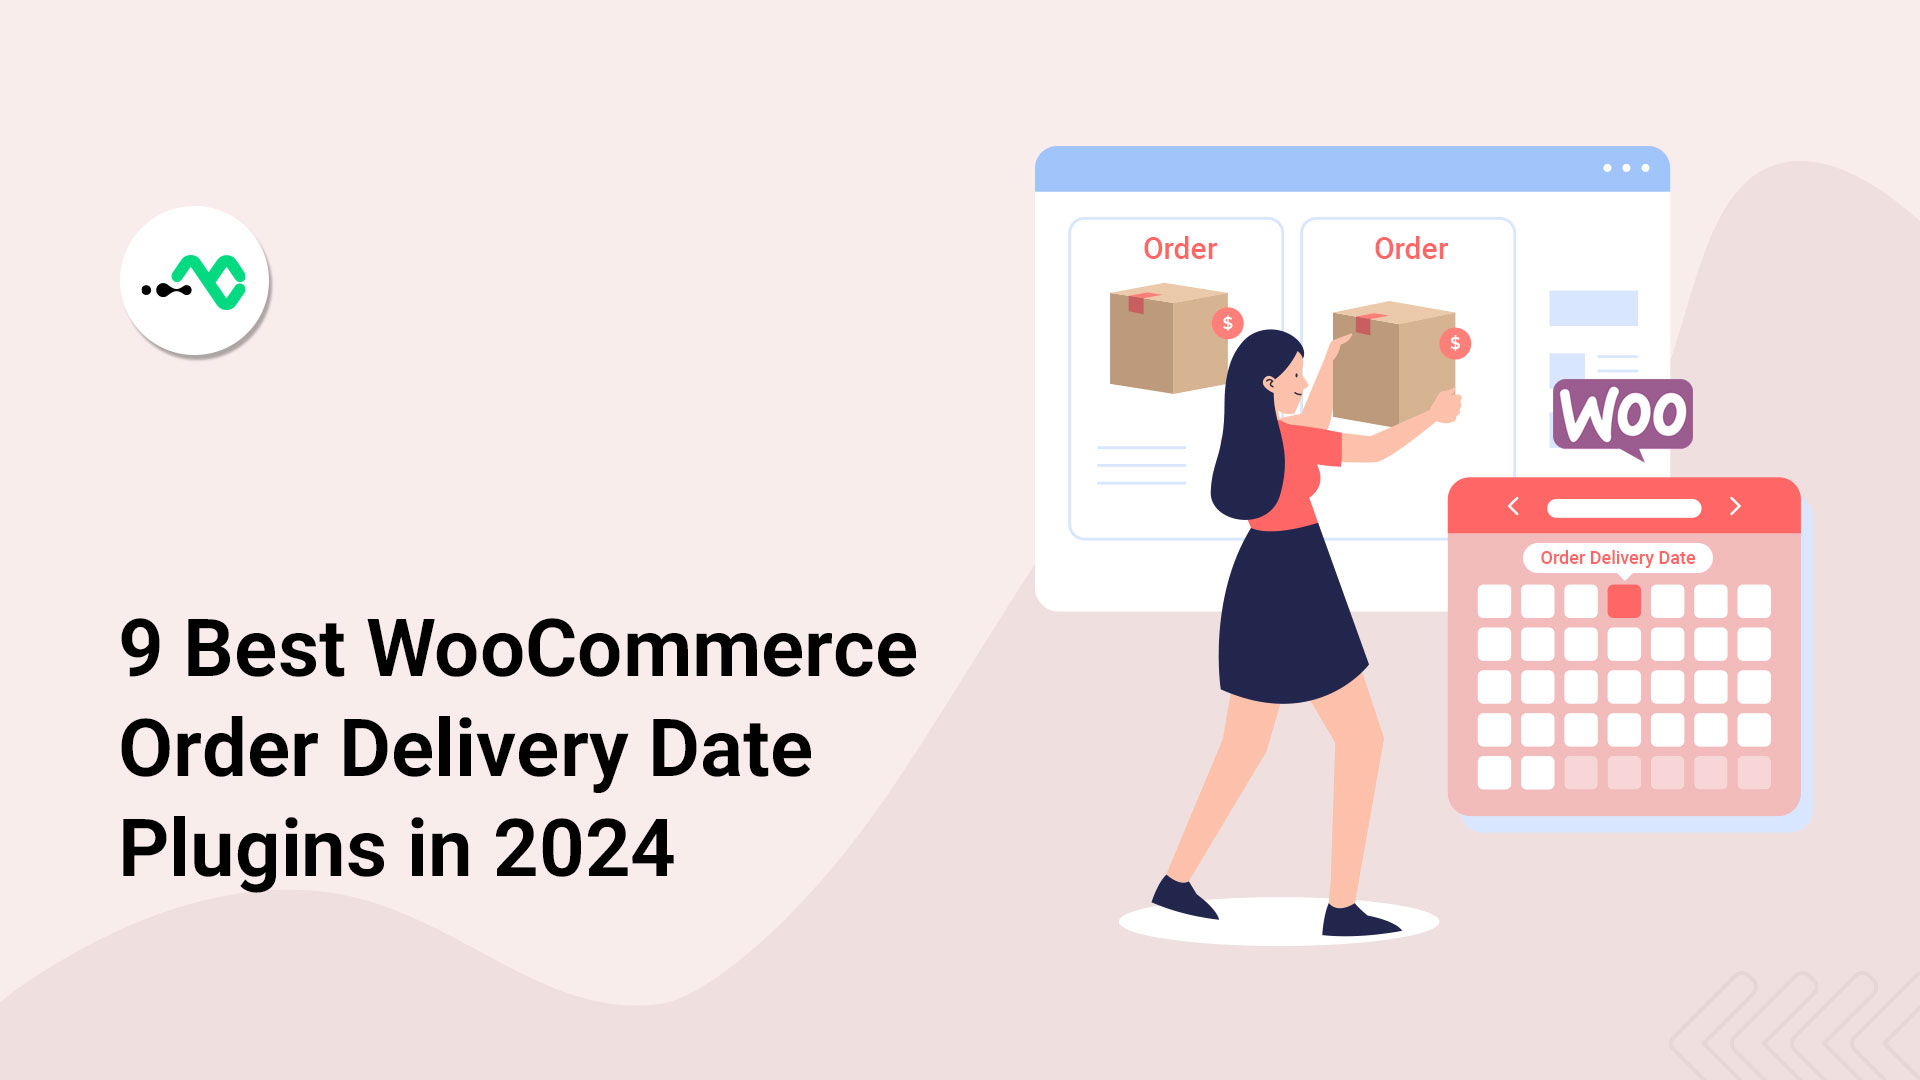 9 Best WooCommerce Order Delivery Date Plugins in 2023